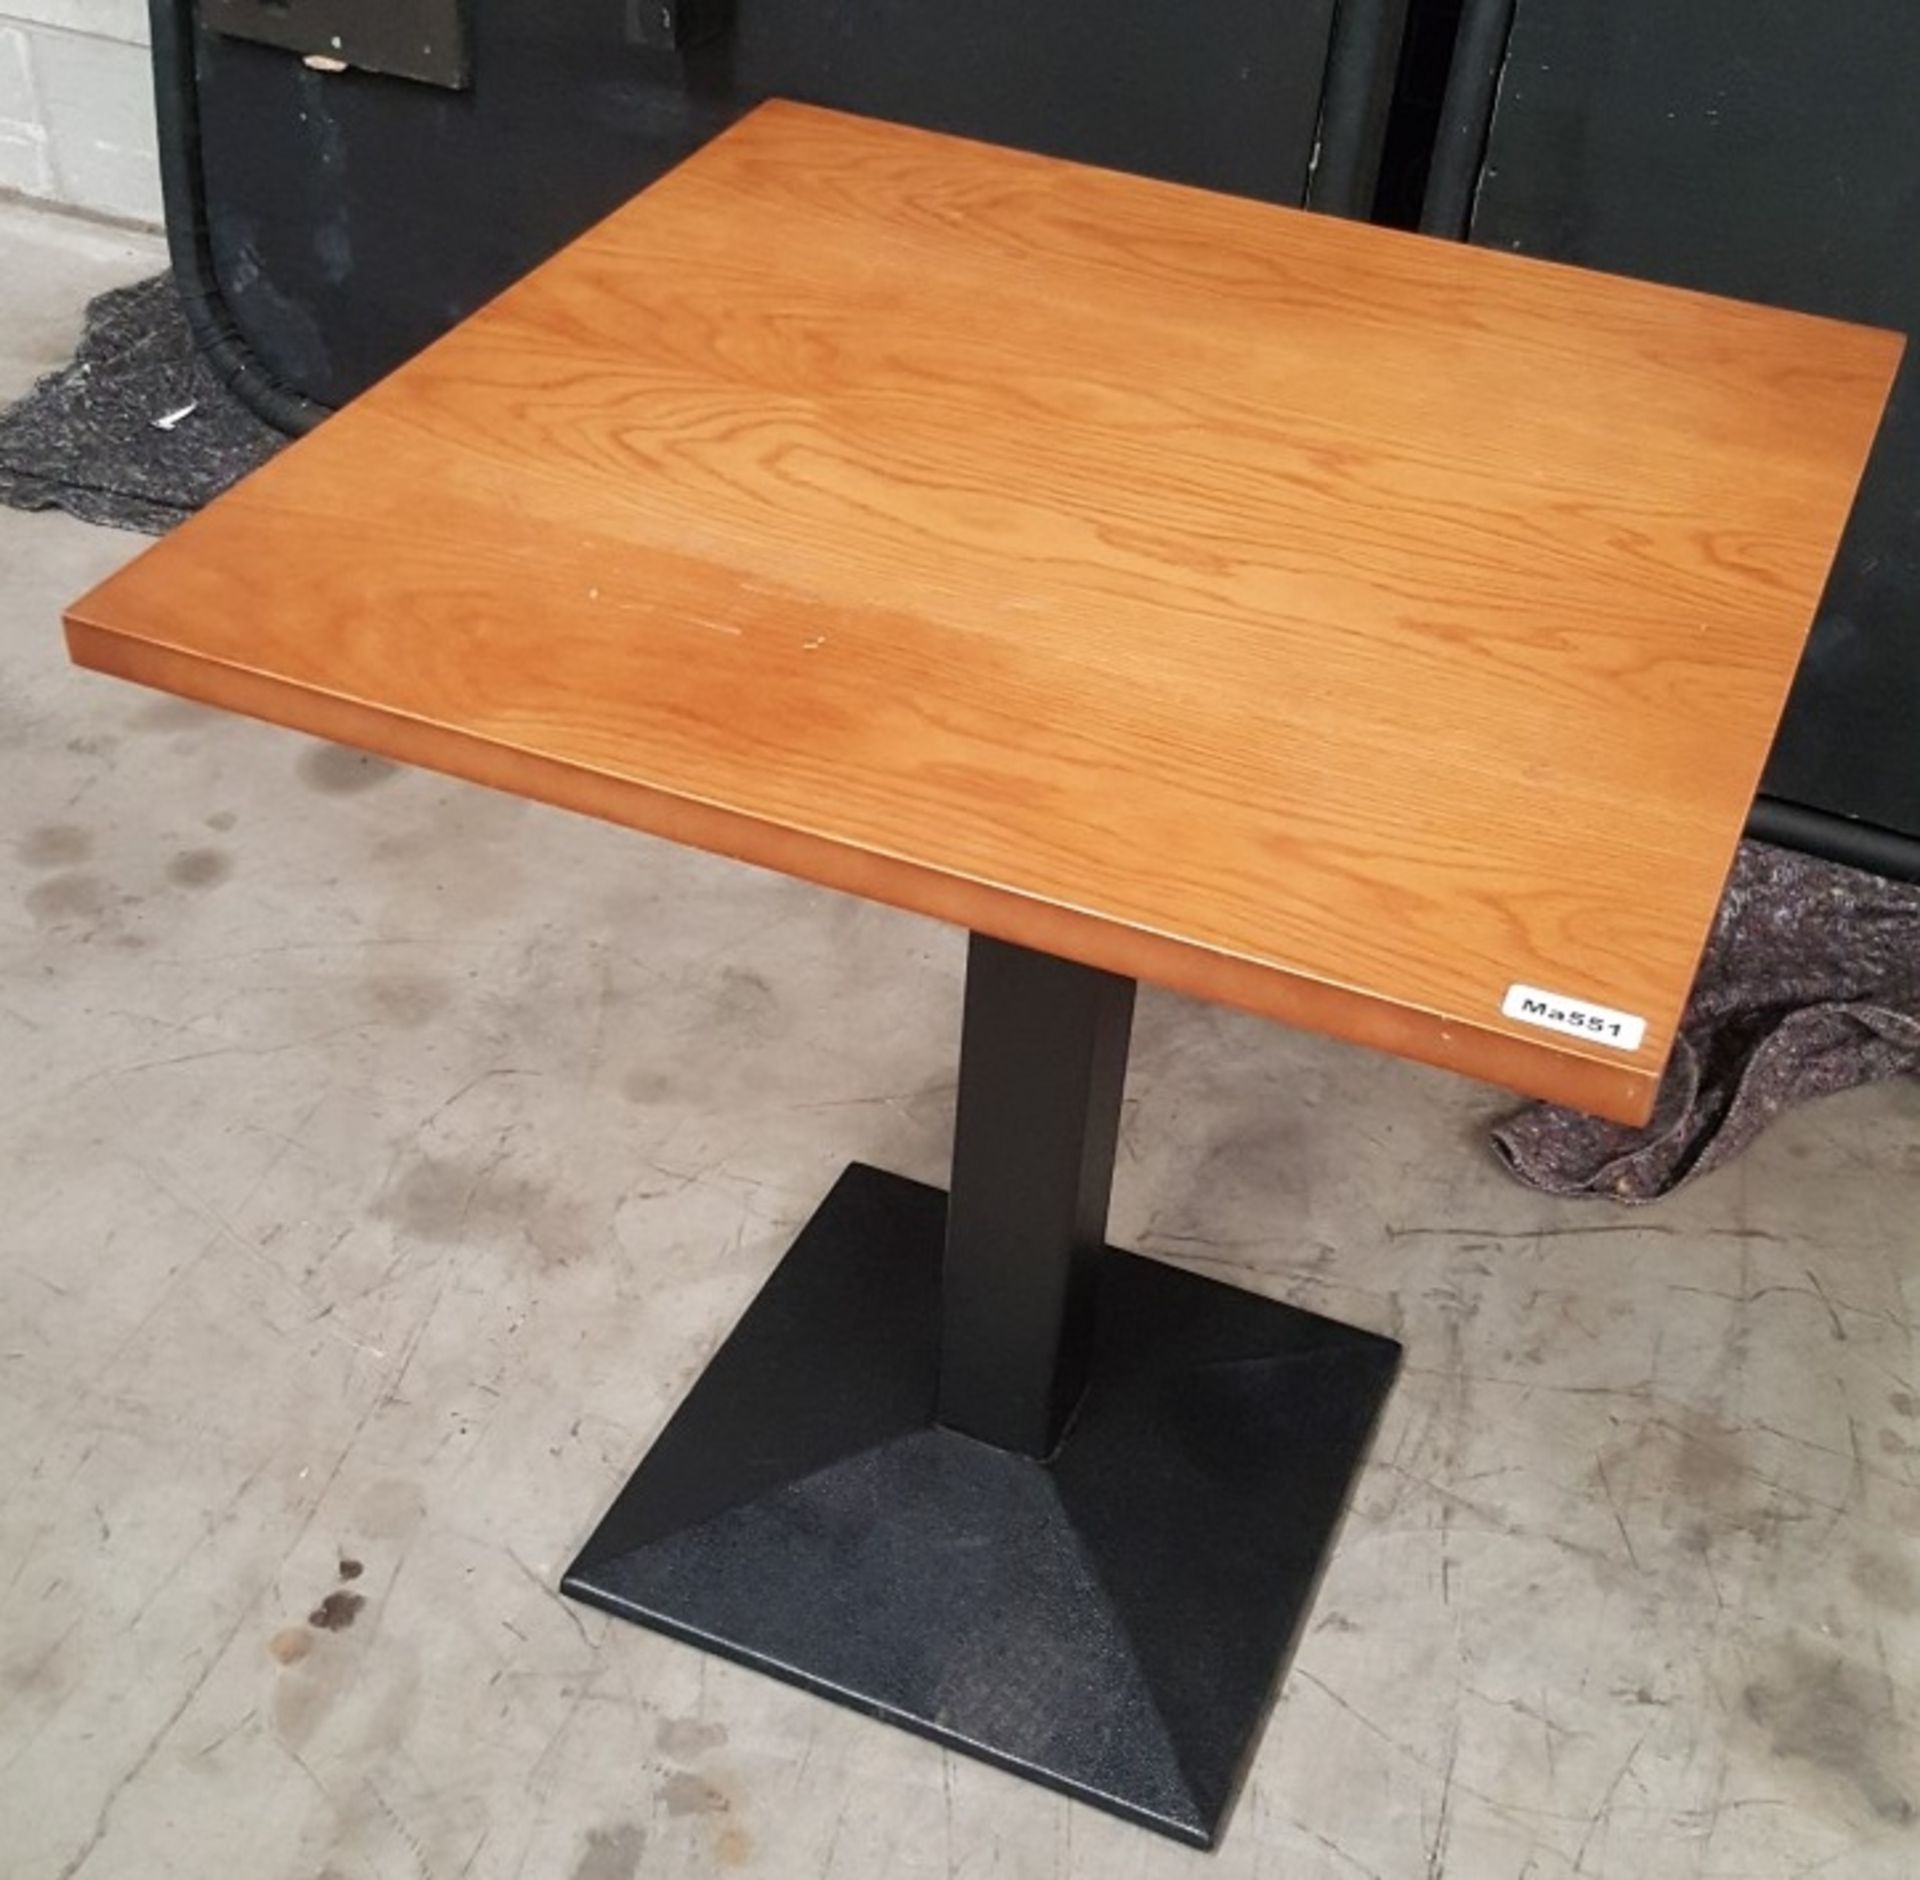 4 x Square Wood-Topped Bistro Tables With Metal Bases - MA551 - CL350 - Location: Altrincham WA14